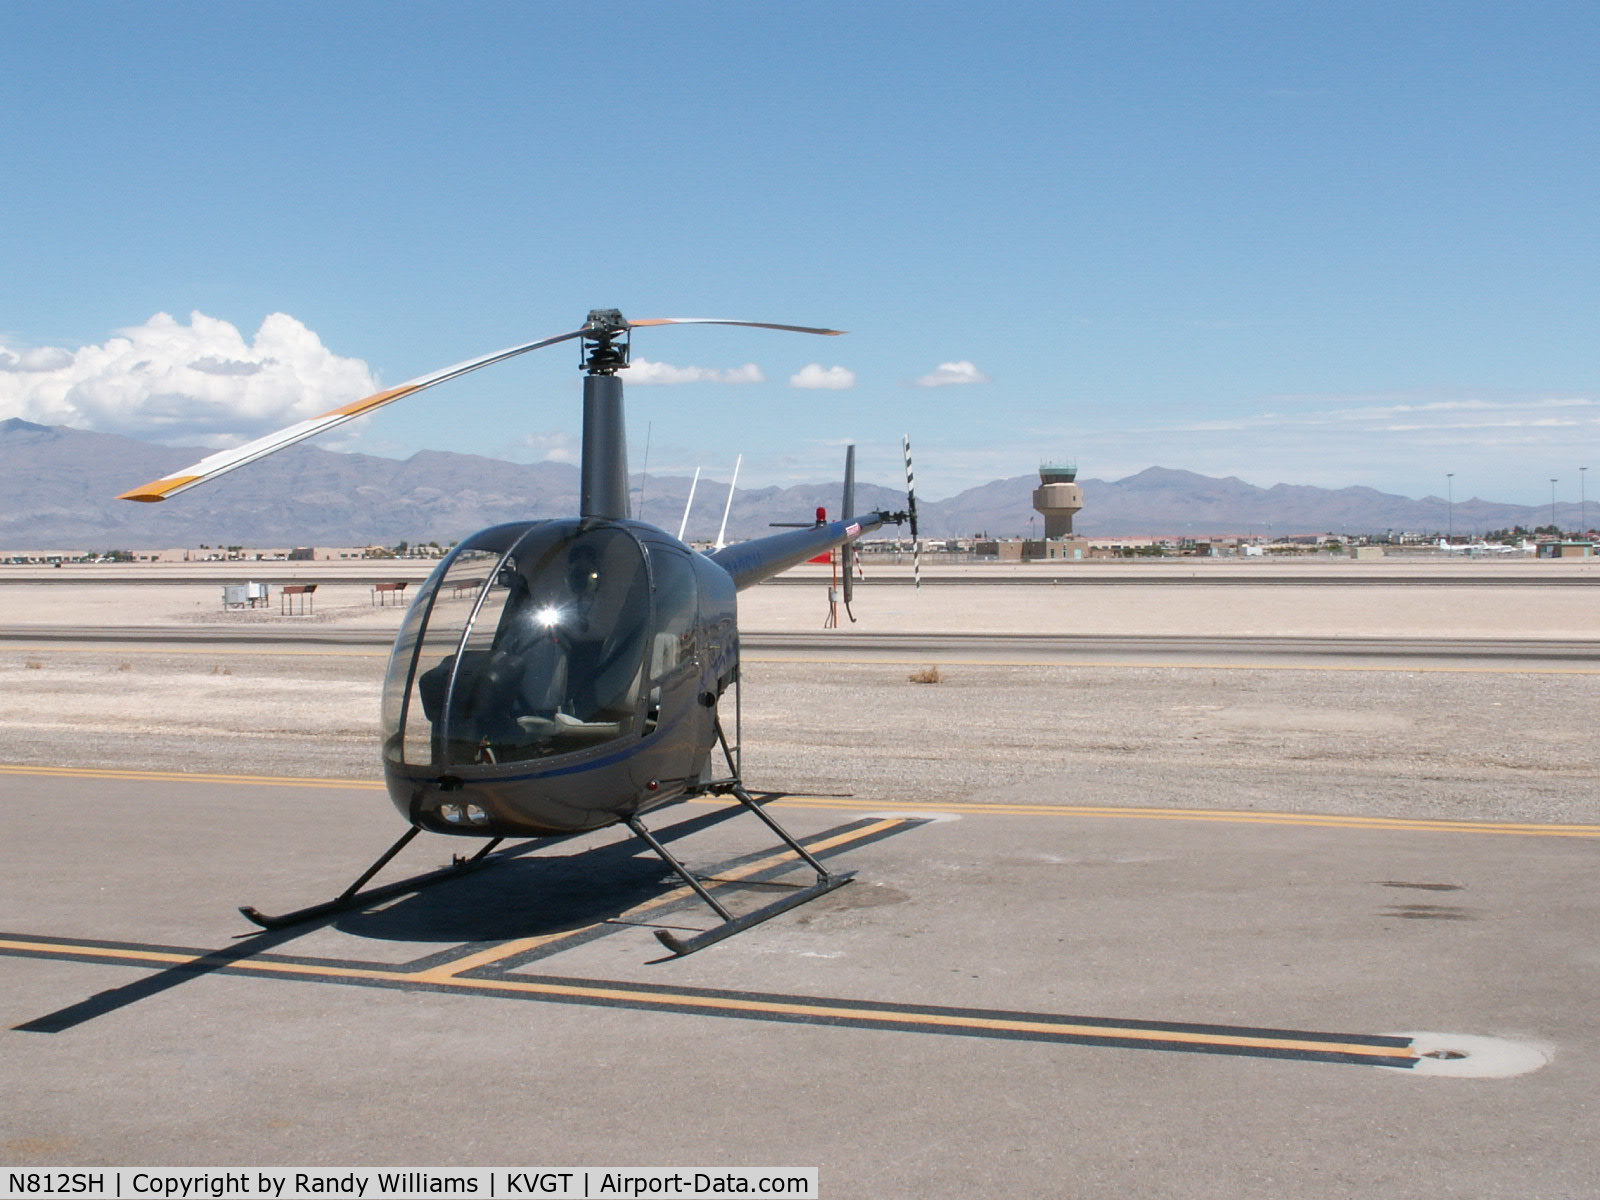 N812SH, 2004 Robinson R22 Beta C/N 3743, Silver State #53 (N812SH)at VGT in front of VGT tower.